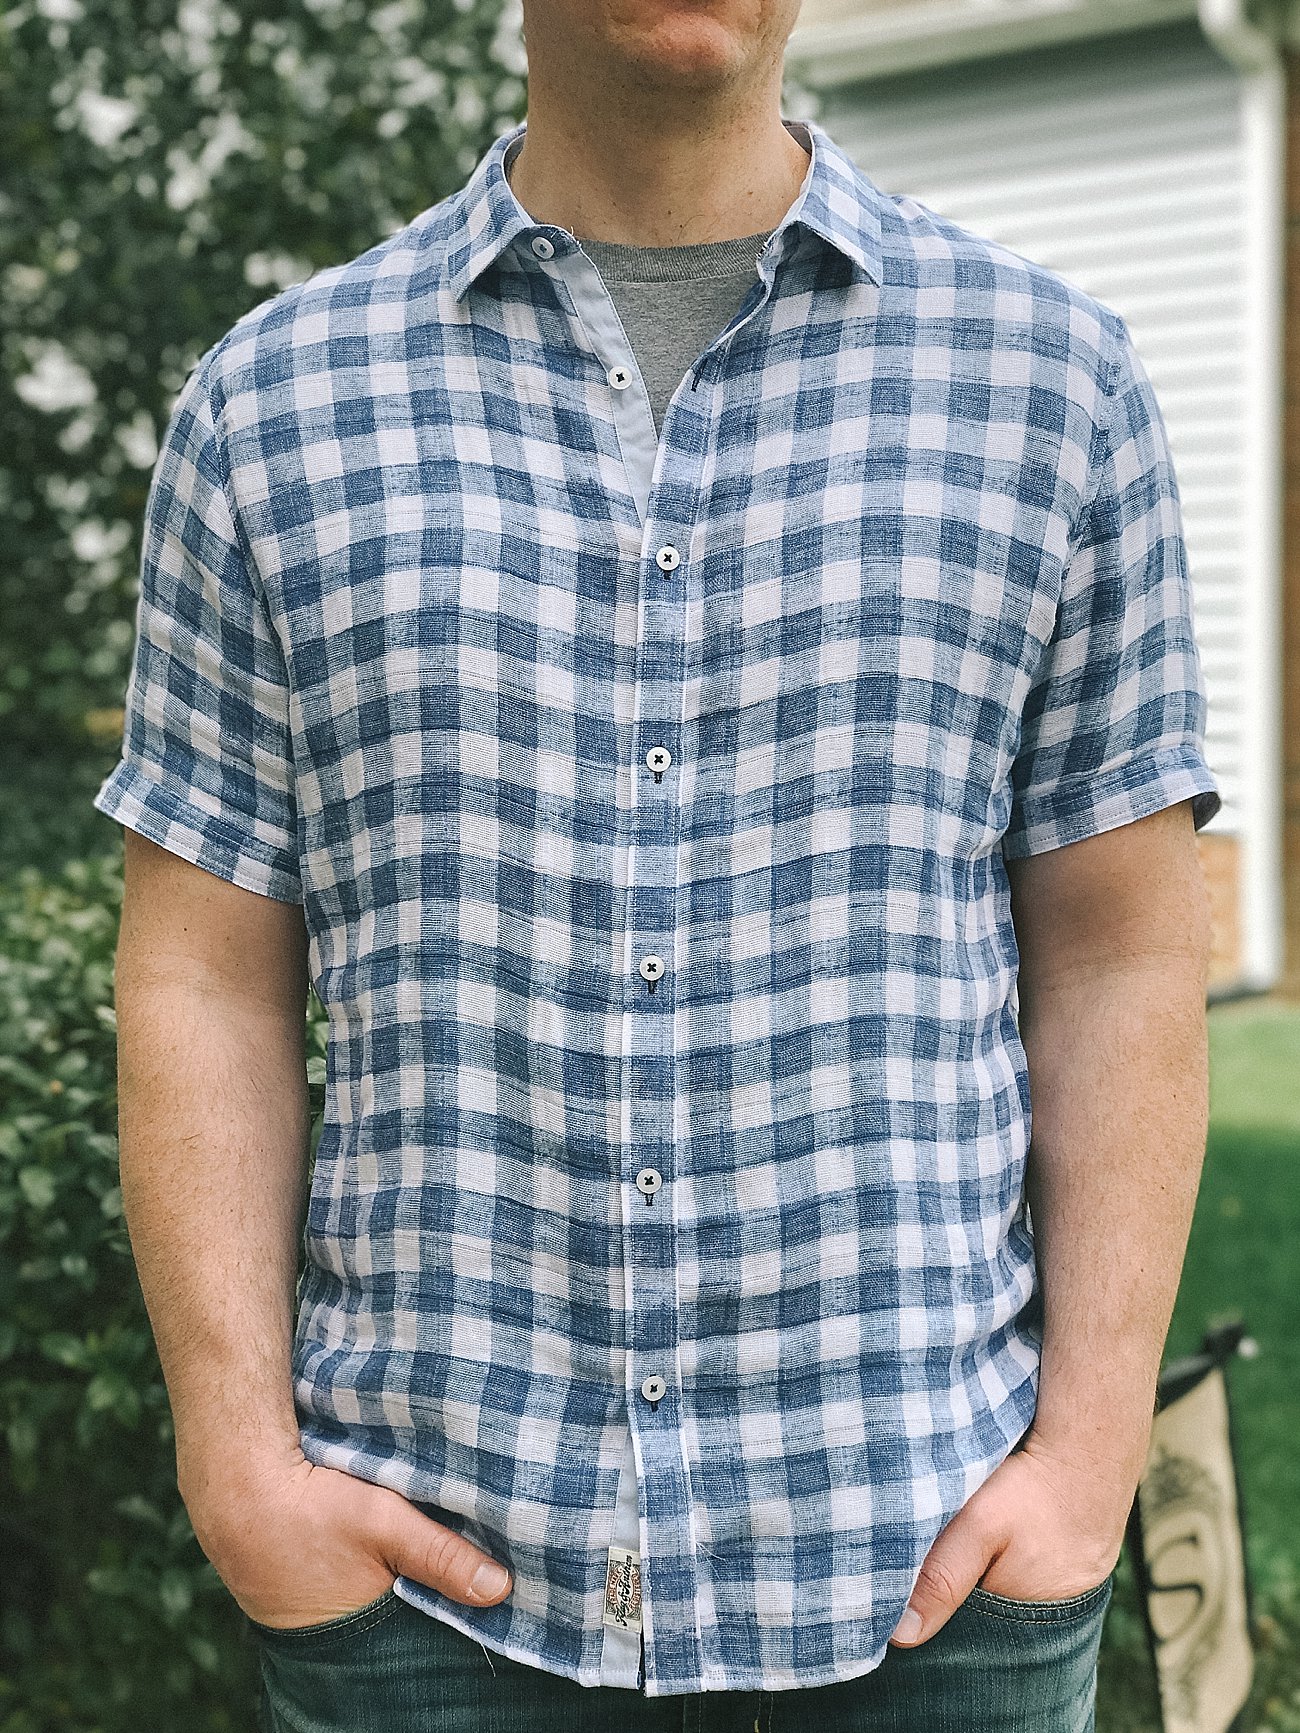 John's Second Stitch Fix for Men Review & Stitch Fix Giveaway by fashion blogger Still Being Molly